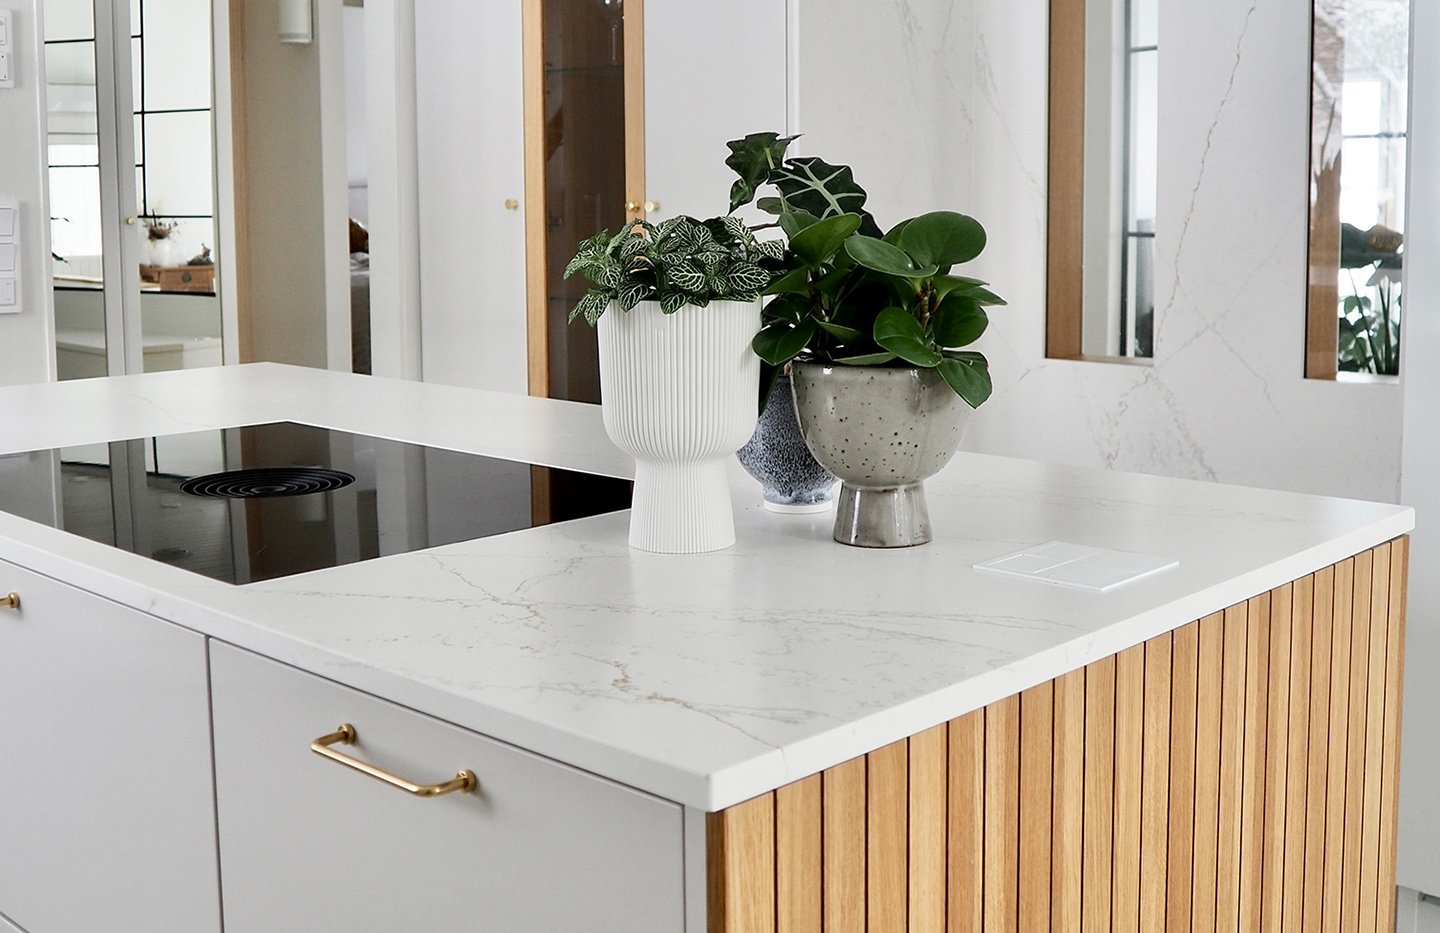 Image of Annamaria Vali Klemela cover cocina in Jessica Rantala was inspired by Dekton to update her home - Cosentino